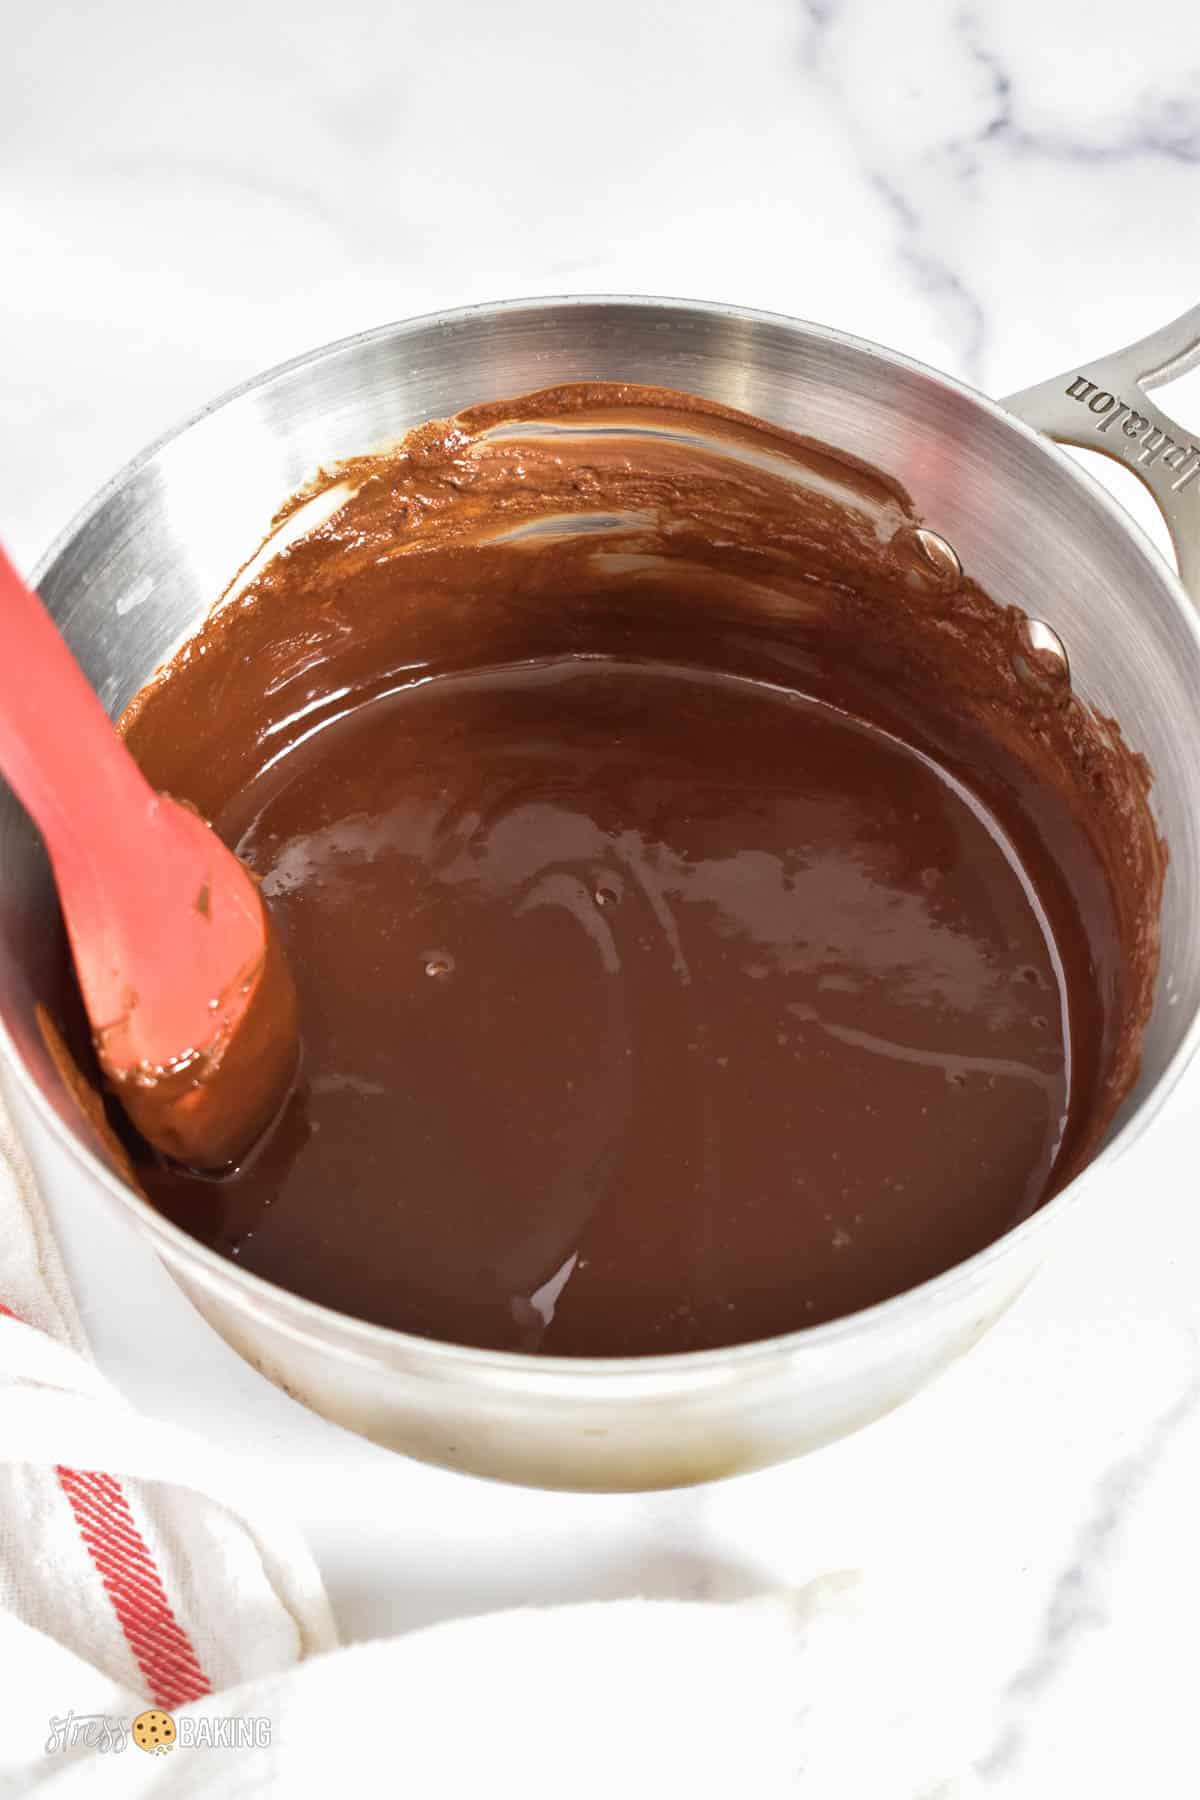 Melted chocolate in a saucepan